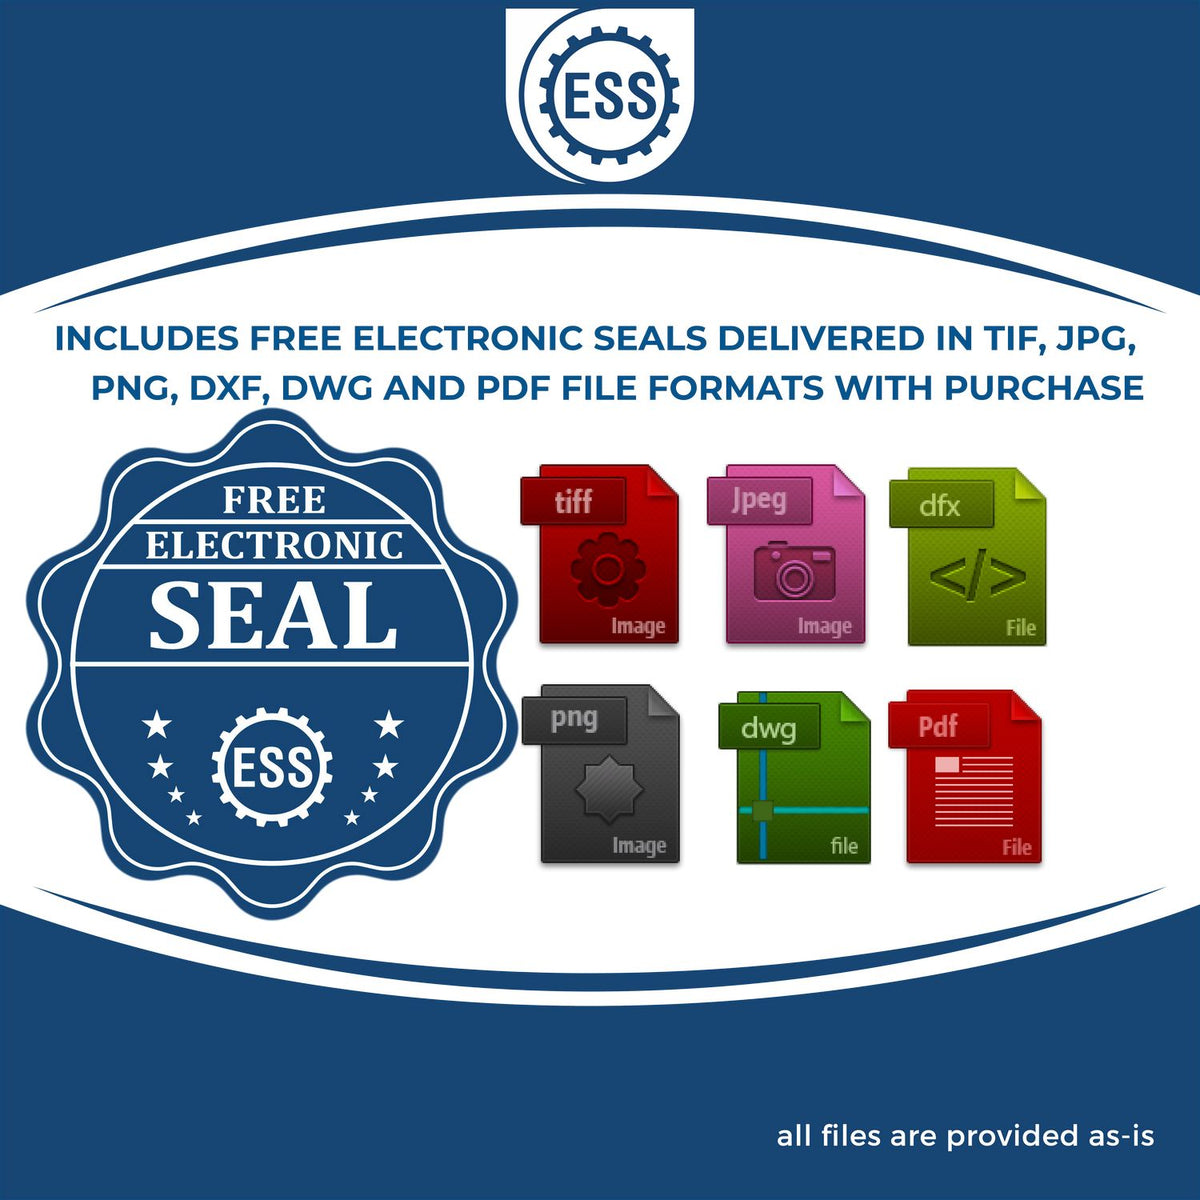 An infographic for the free electronic seal for the Hybrid Oklahoma Land Surveyor Seal illustrating the different file type icons such as DXF, DWG, TIF, JPG and PNG.